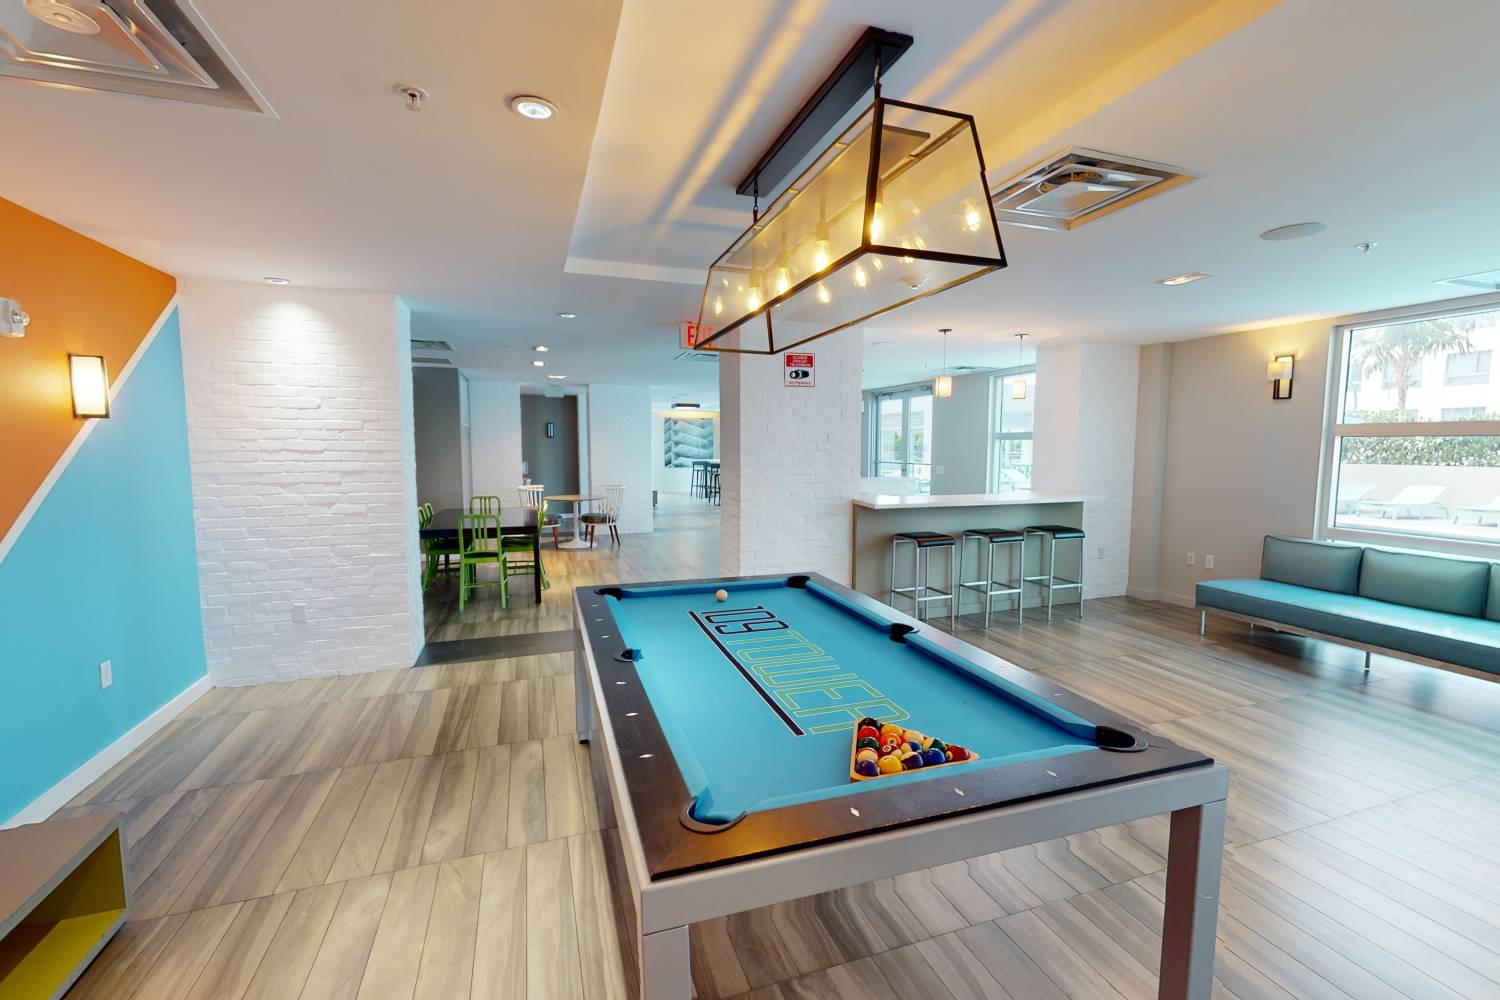 Billiards table in game room at 109 Tower in Miami, Florida